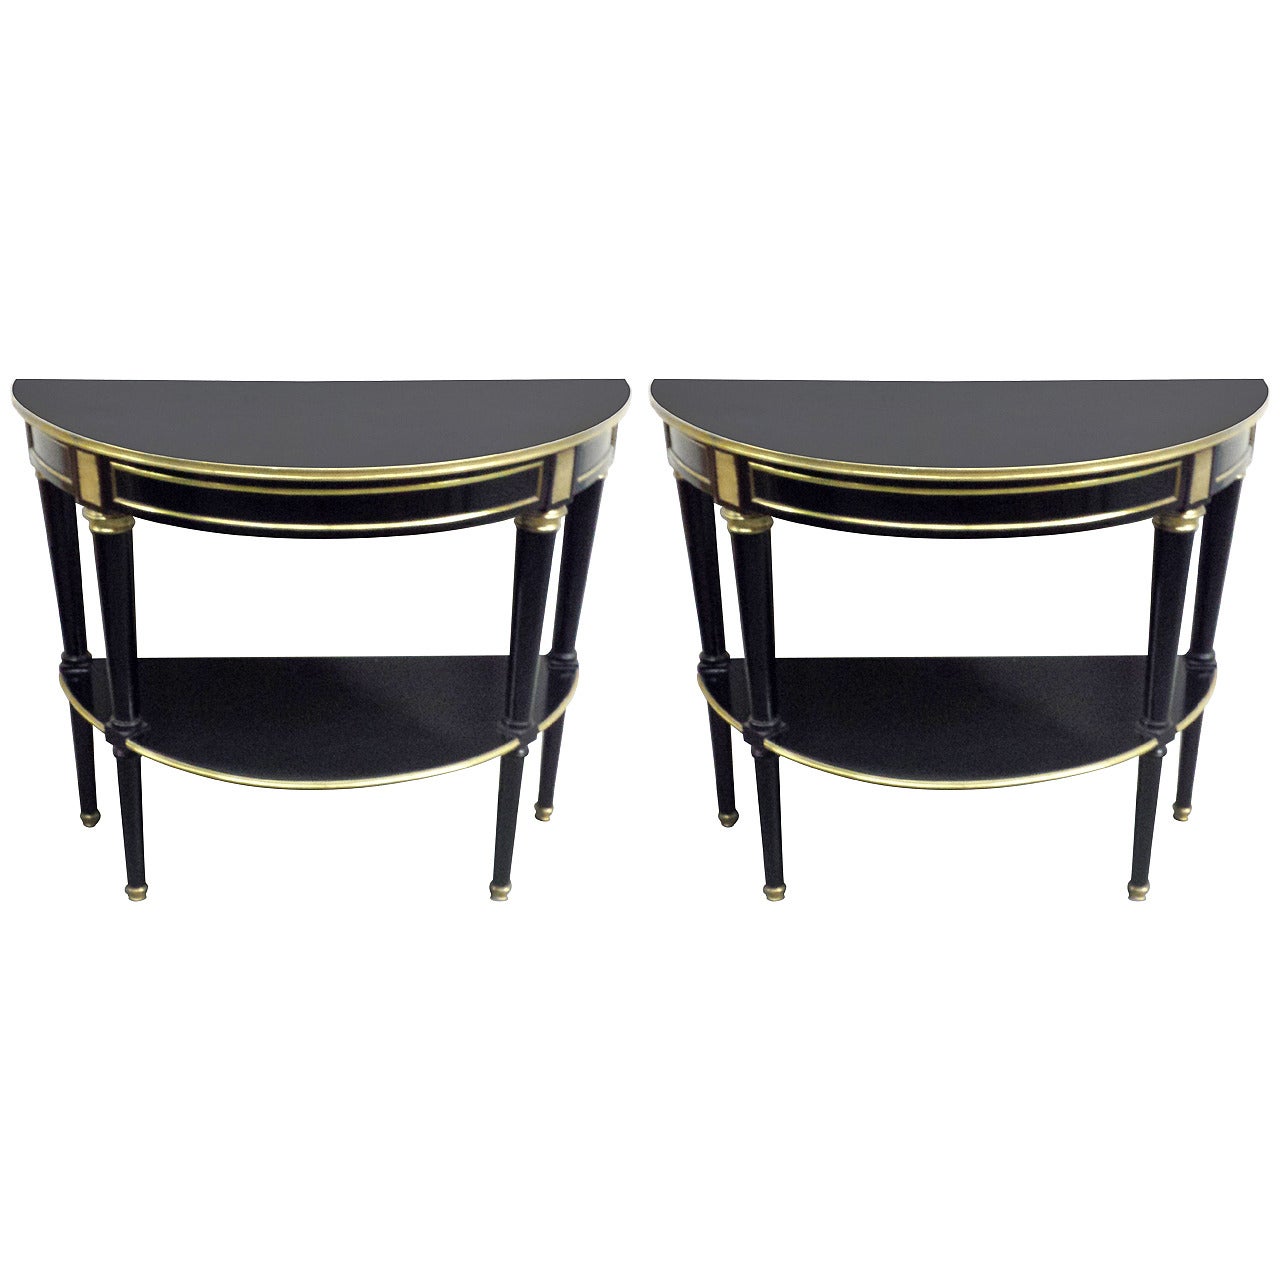 Pair of Directoire Style, Bronze-Mounted Demilune Consoles